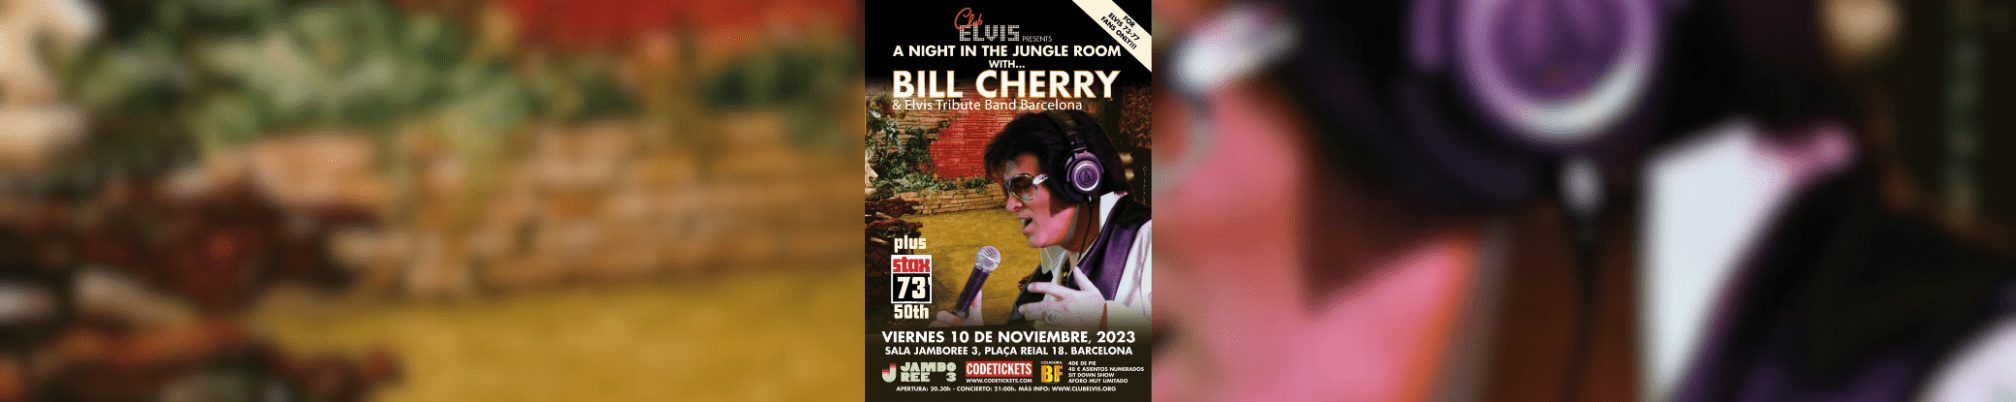 Elvis: A Night In The Jungle Room with Bill Cherry Jamboree